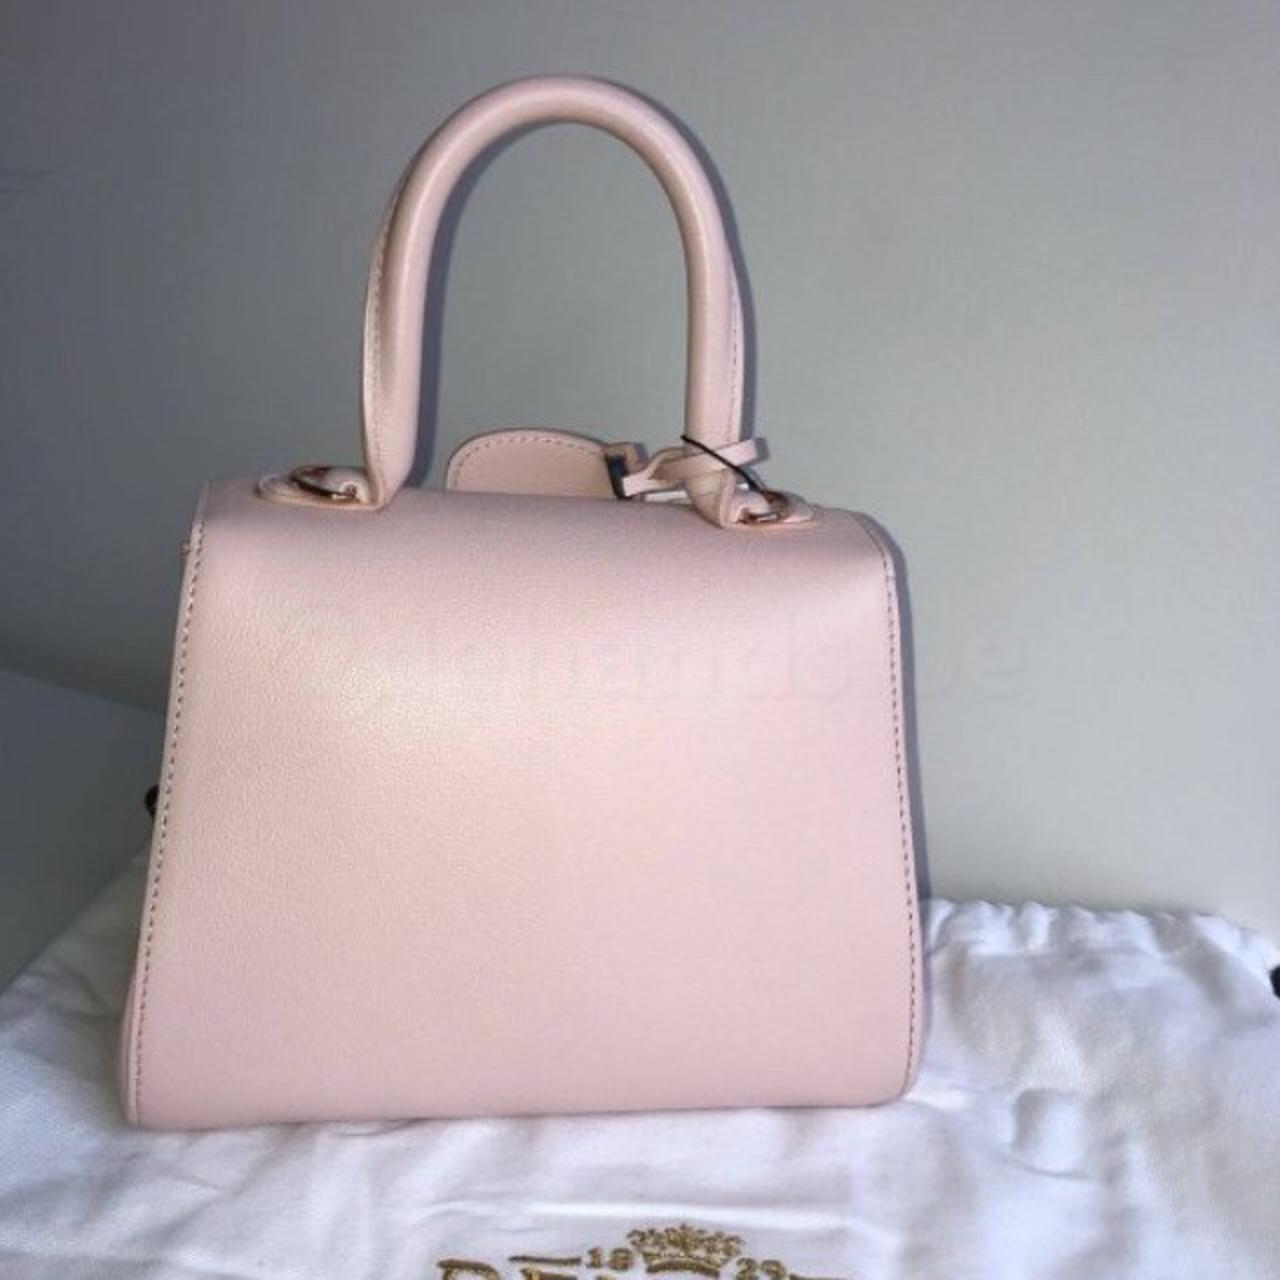 Delvaux Tempete Mini Try On, Pricing on Instagram: bstyledluxe